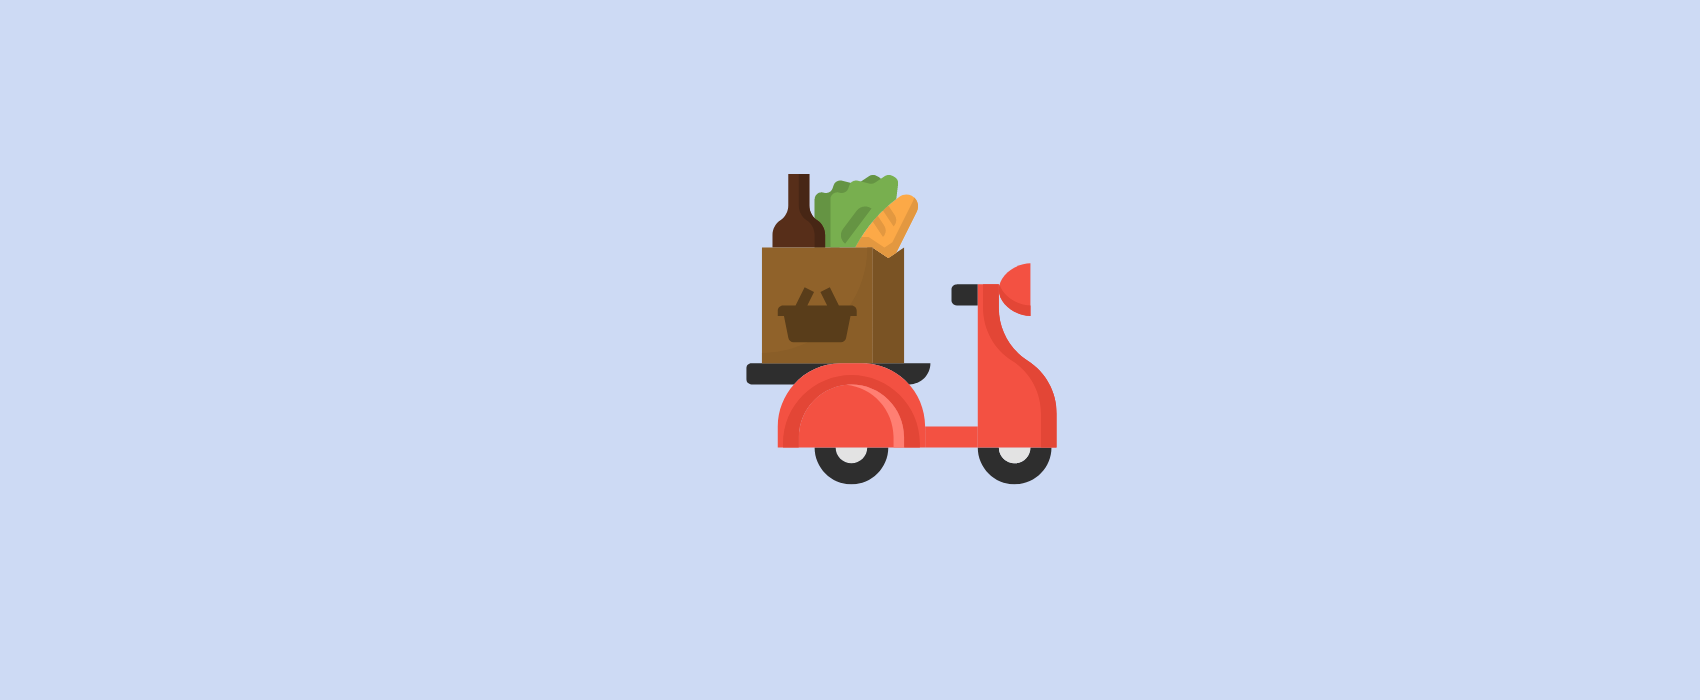 Rosie and DoorDash Partner to Offer Free Grocery Delivery Through September